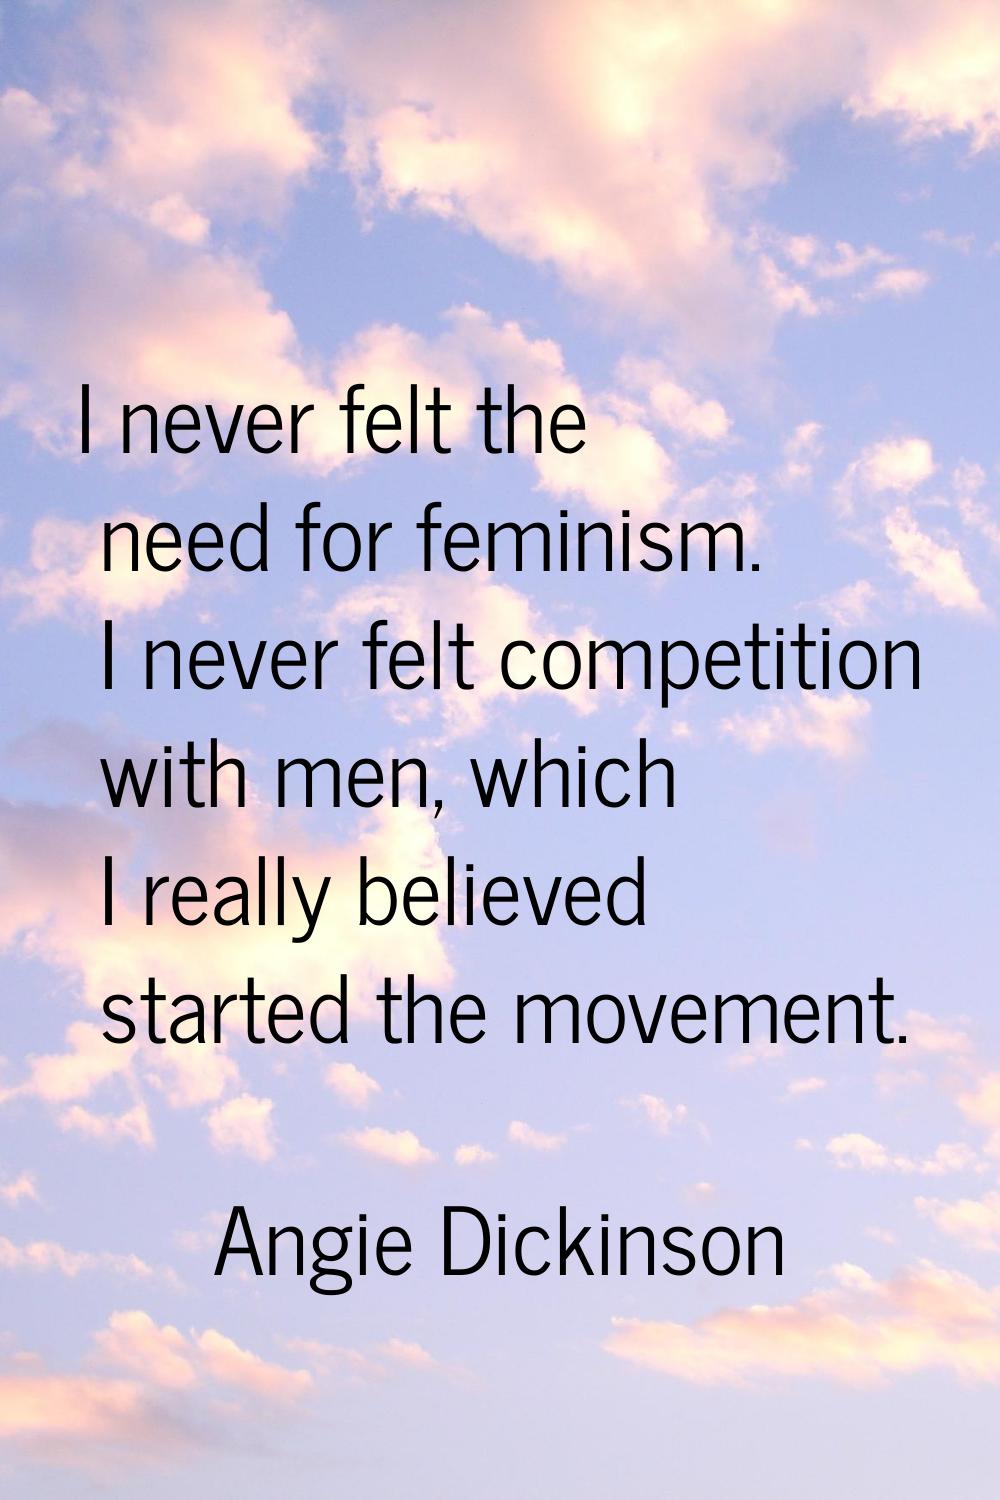 I never felt the need for feminism. I never felt competition with men, which I really believed star